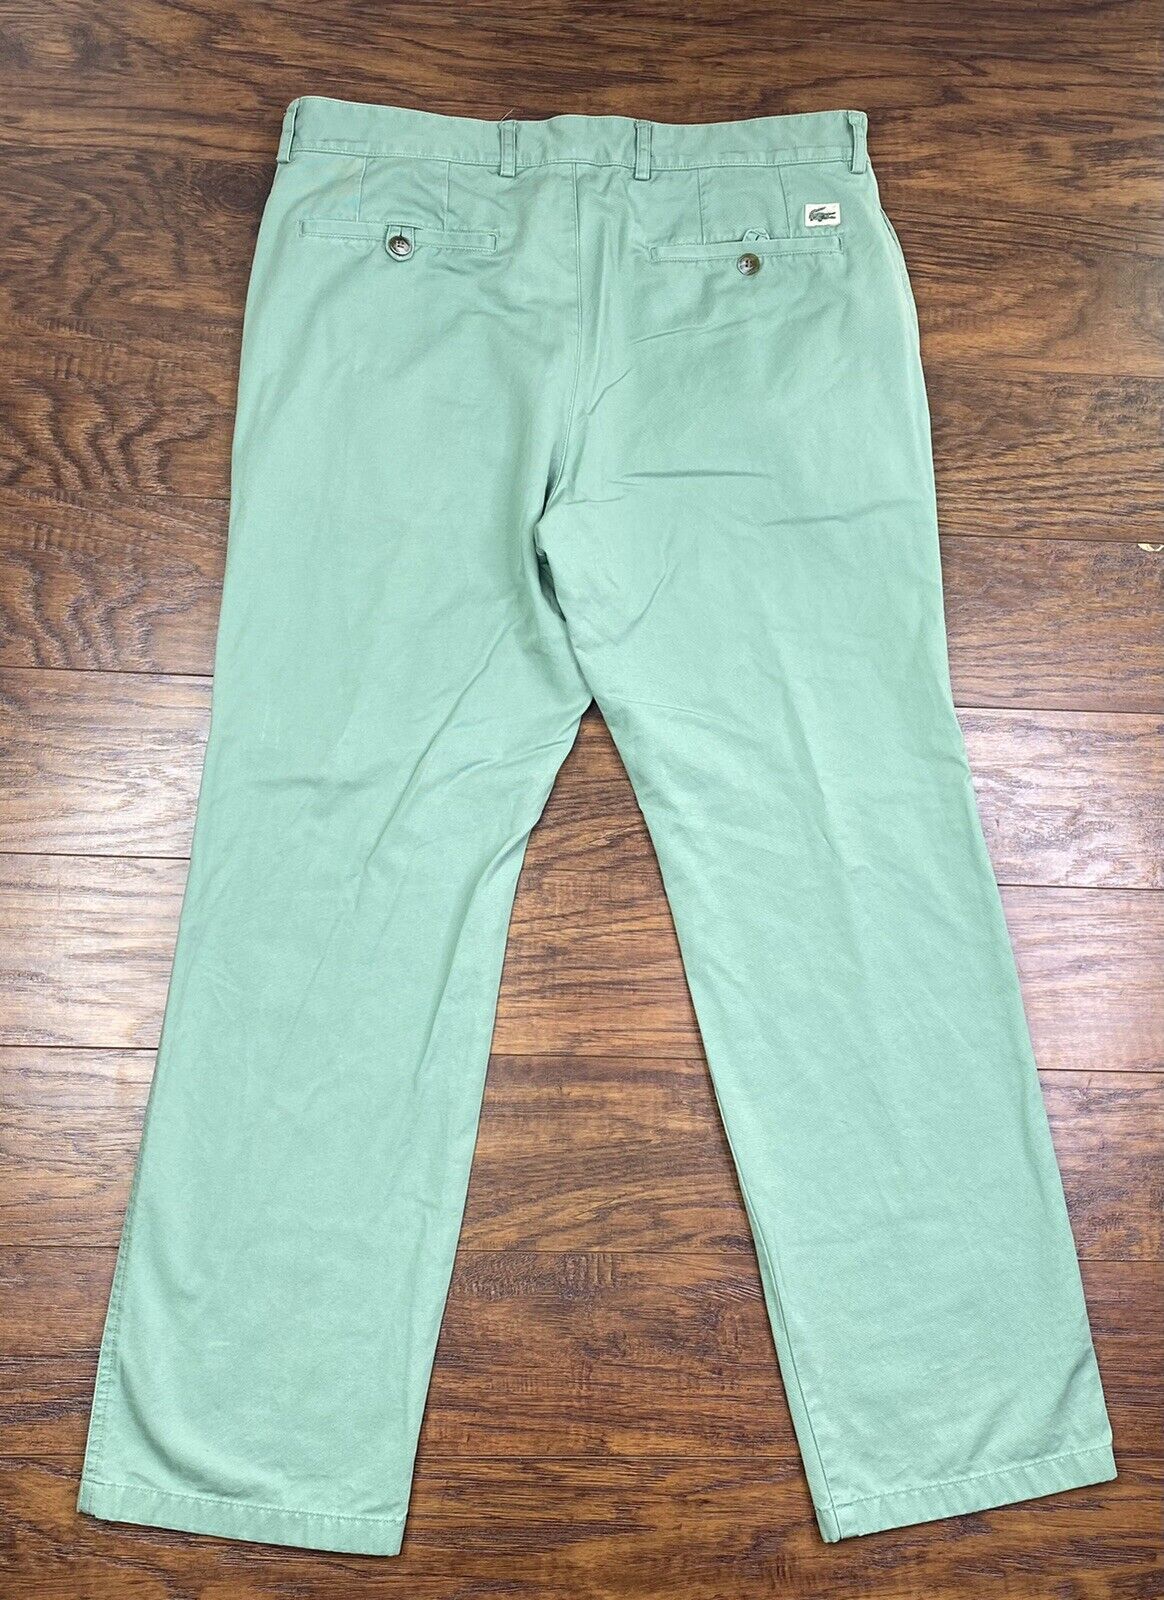 lacoste jeans 34x28 Eur 42 green A3 - image 2